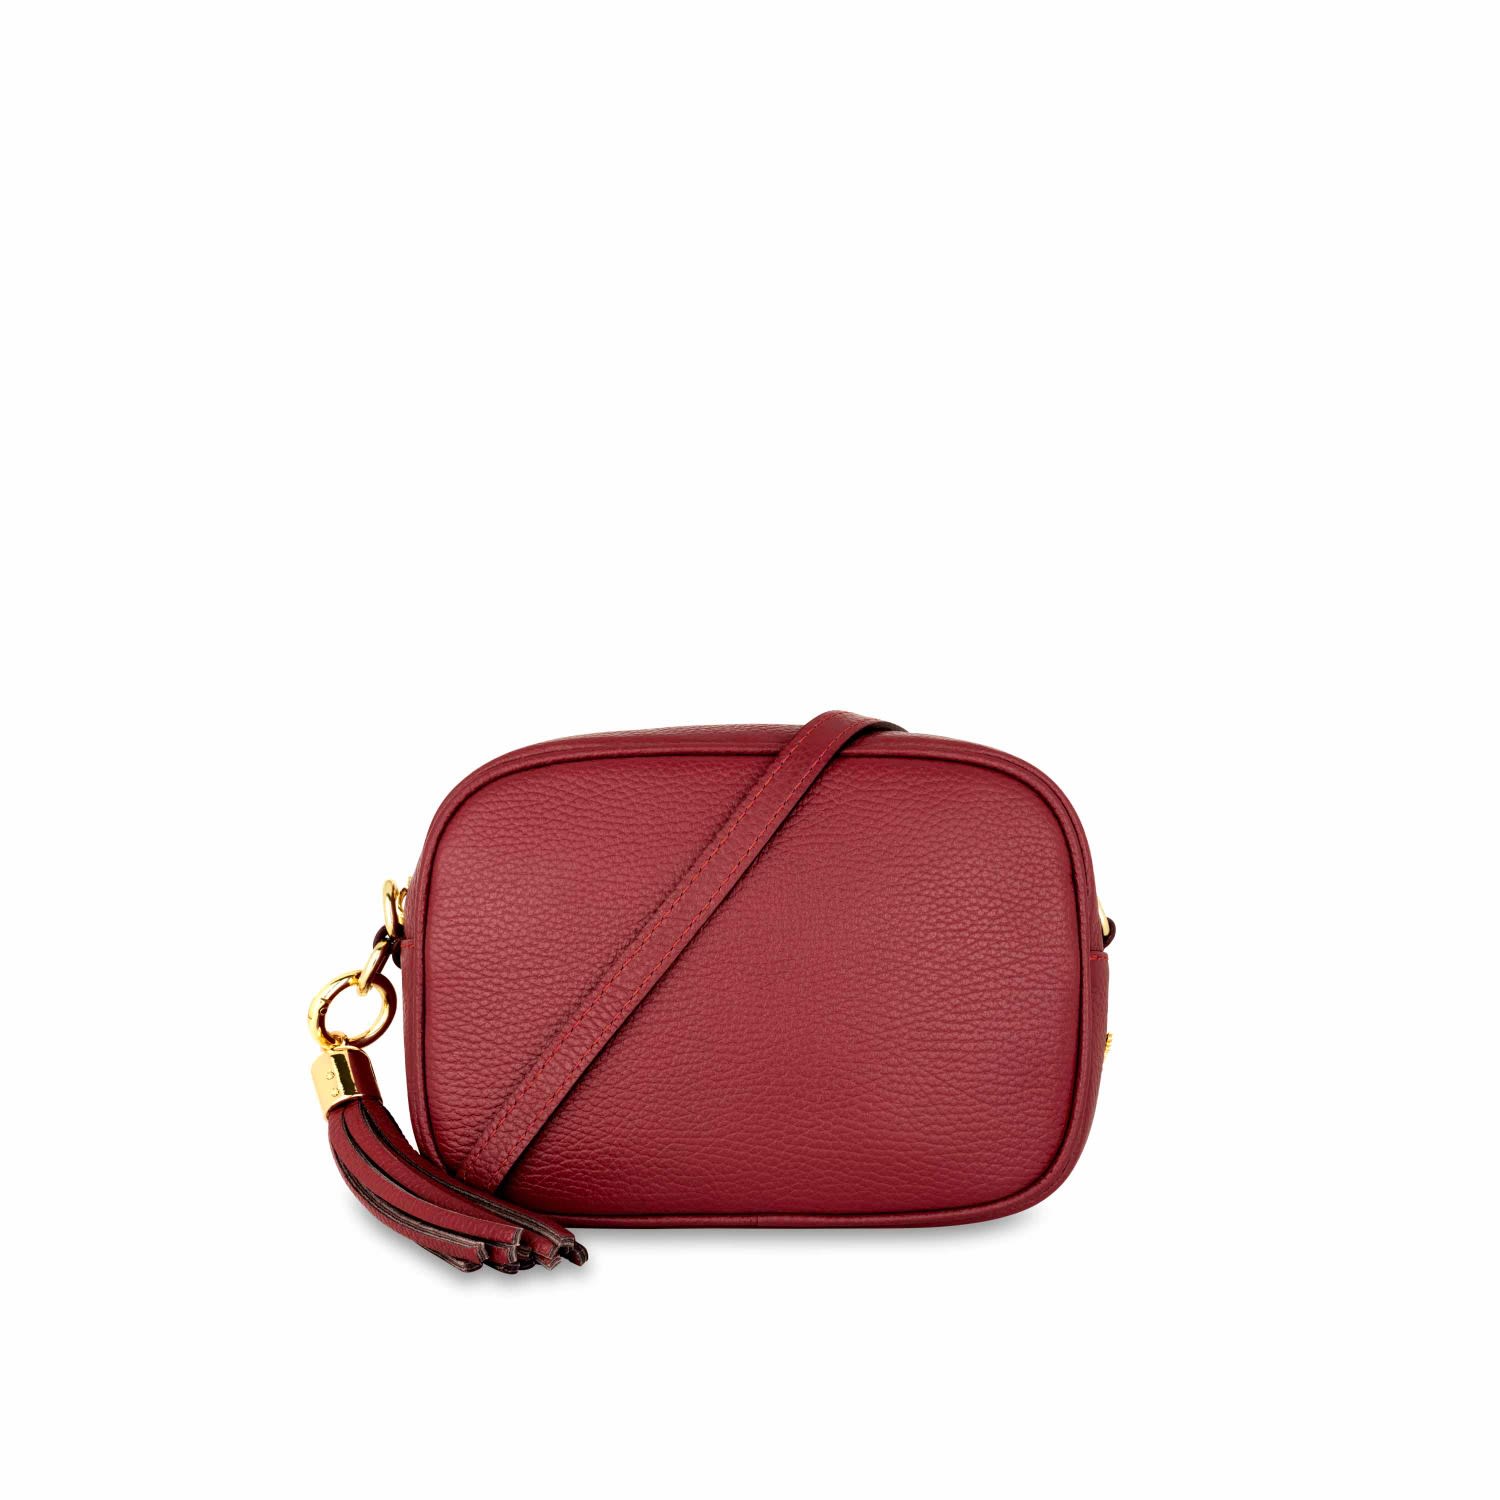 Apatchy London Women's The Tassel Cherry Red Leather Crossbody Bag